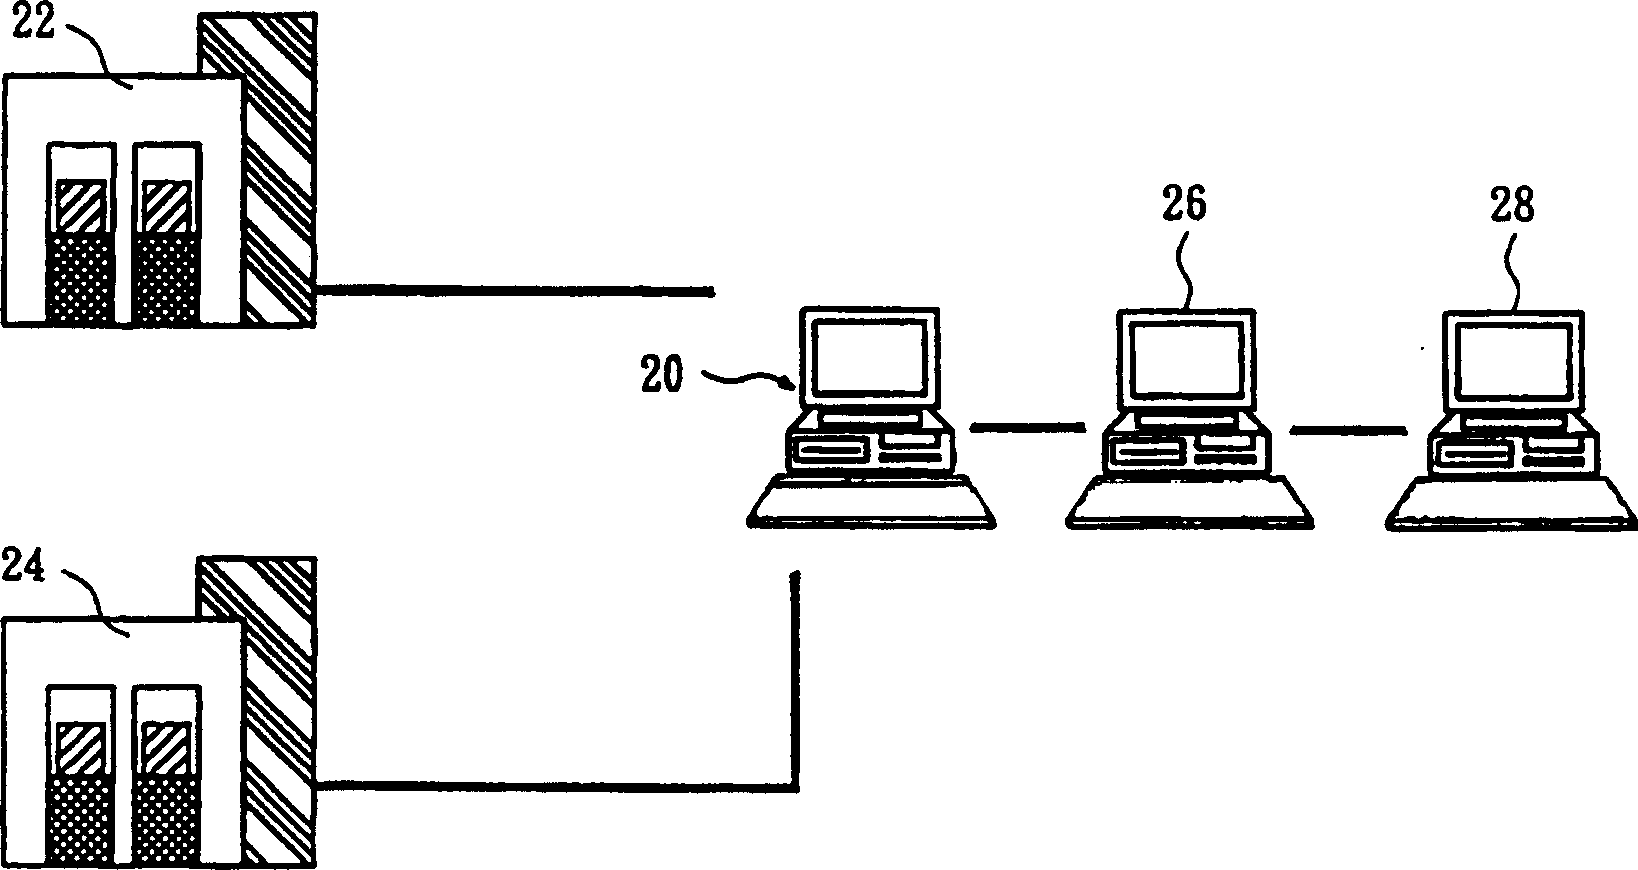 Bench monitoring method and system for mfg. integrated circuit